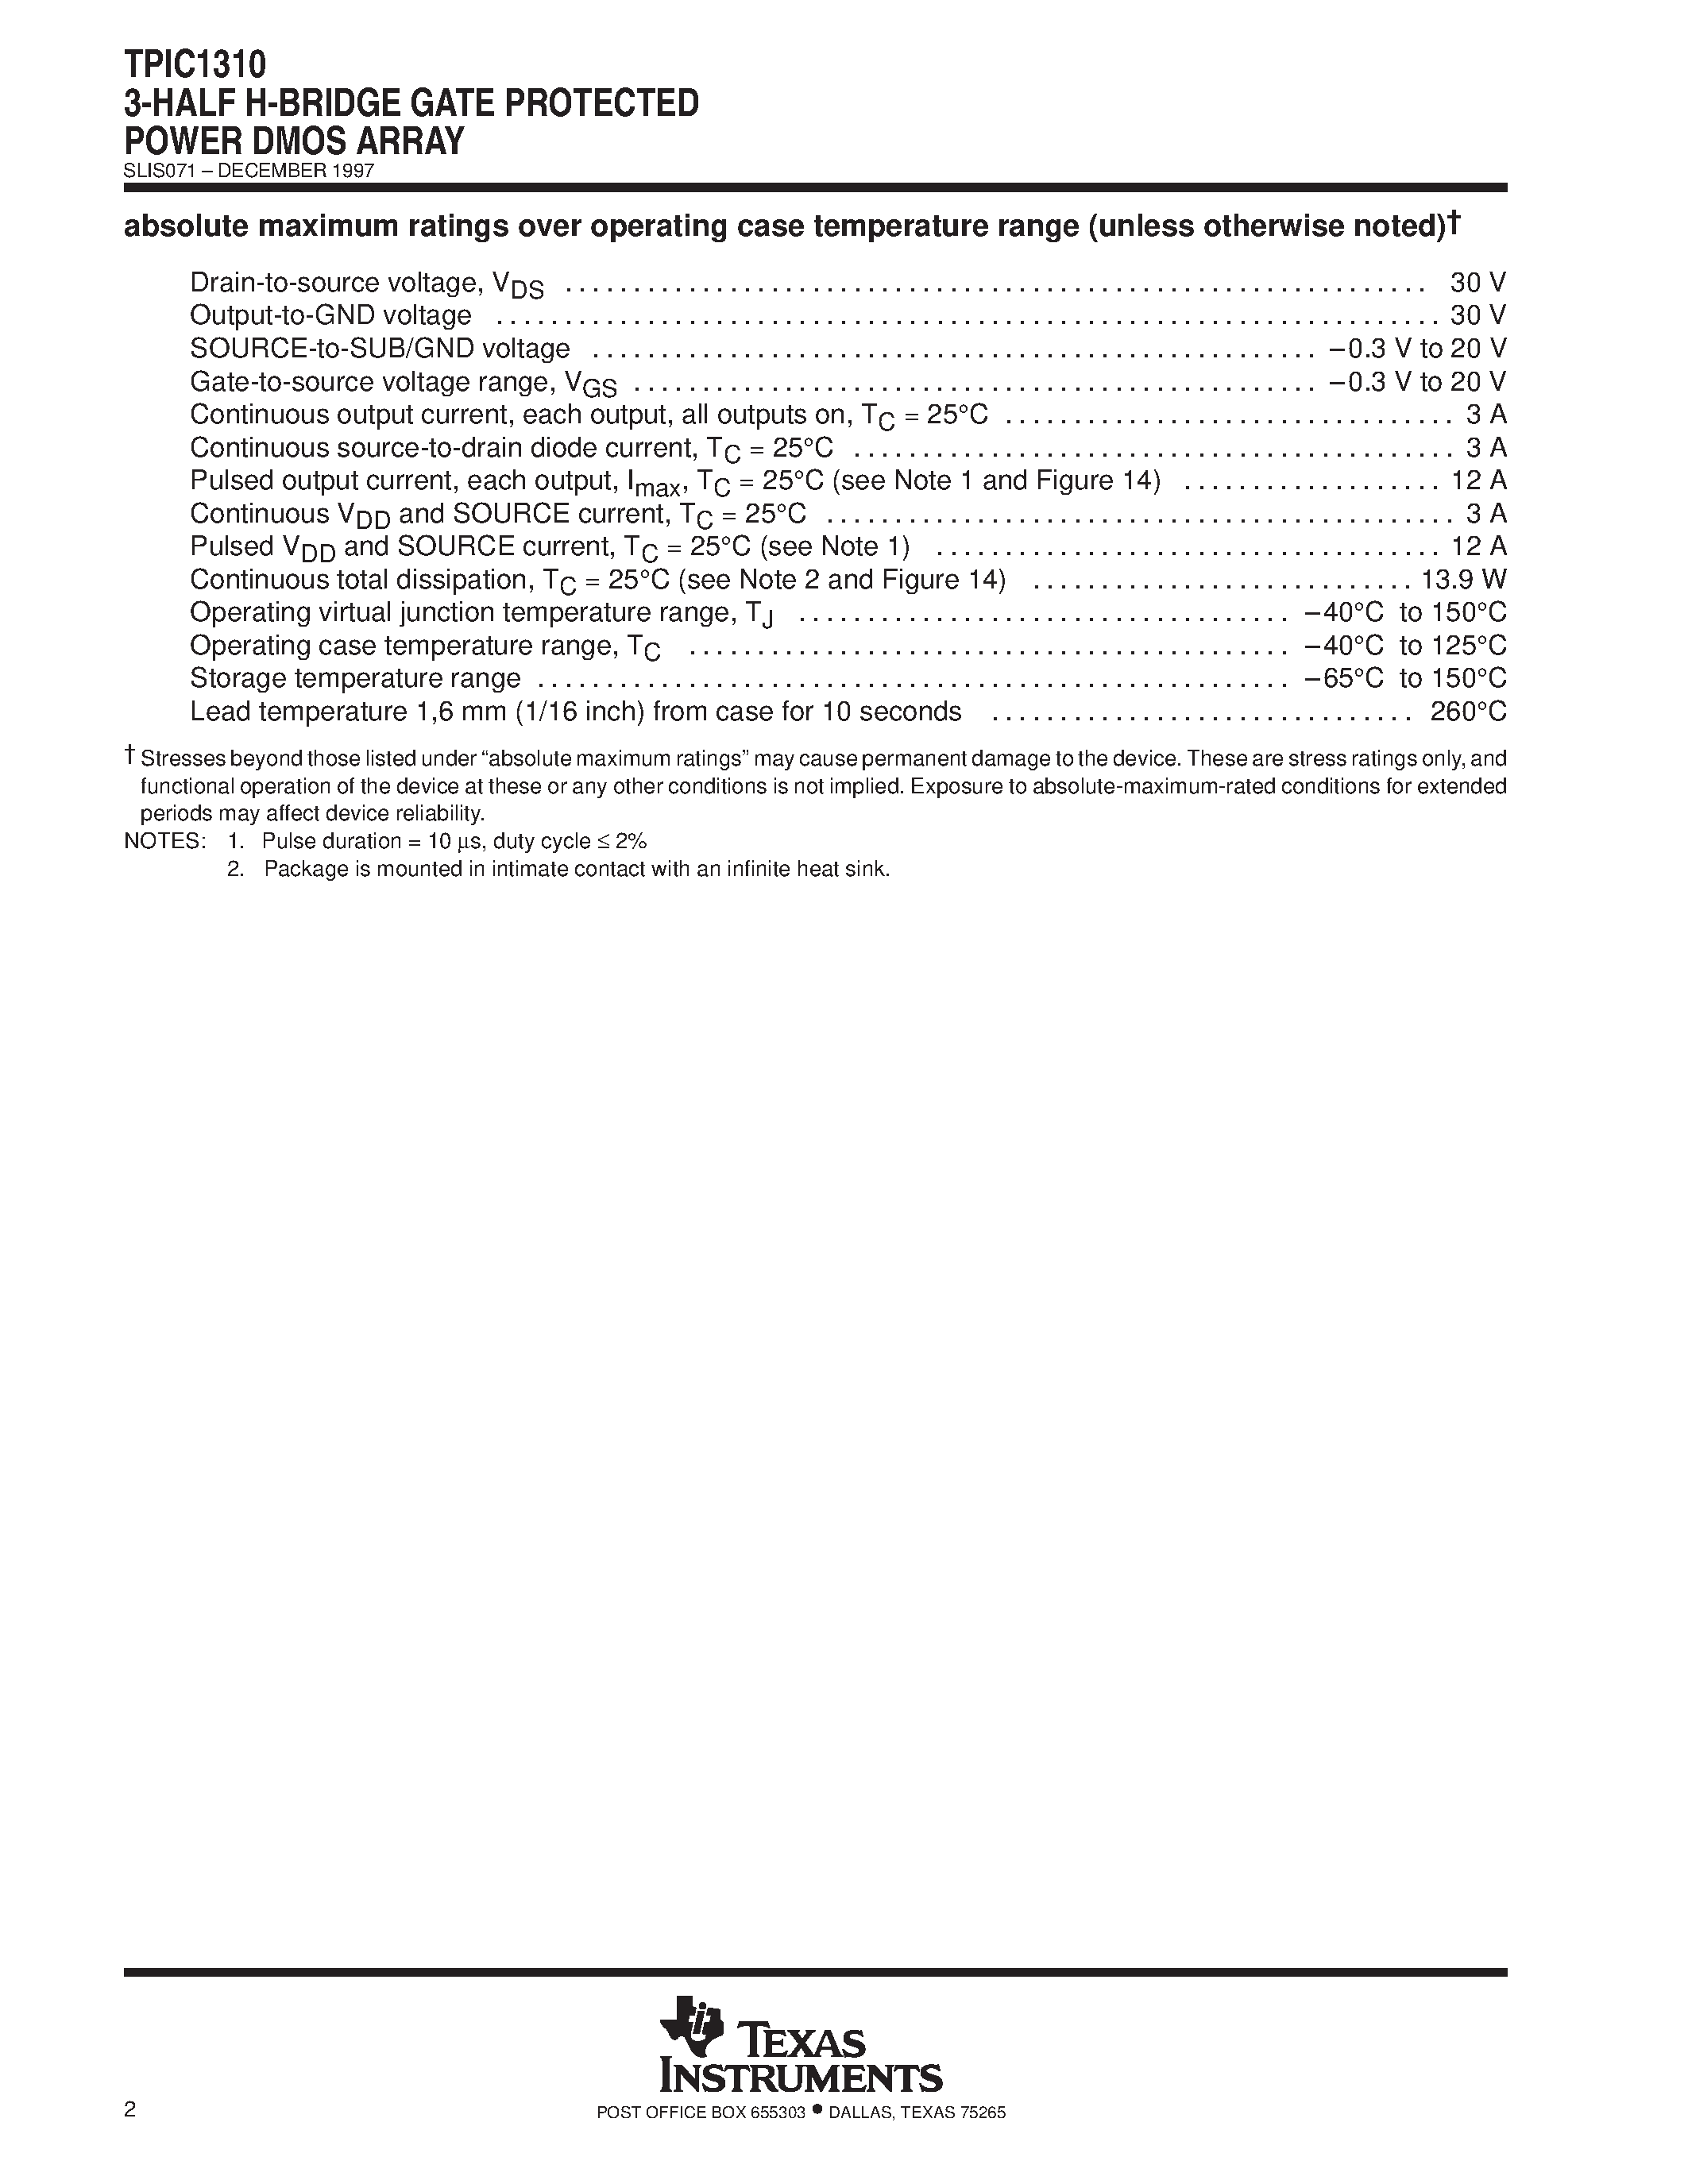 Datasheet TPIC1310 - 3-HALF H-BRIDGE GATE PROTECTED POWER DMOS ARRAY page 2